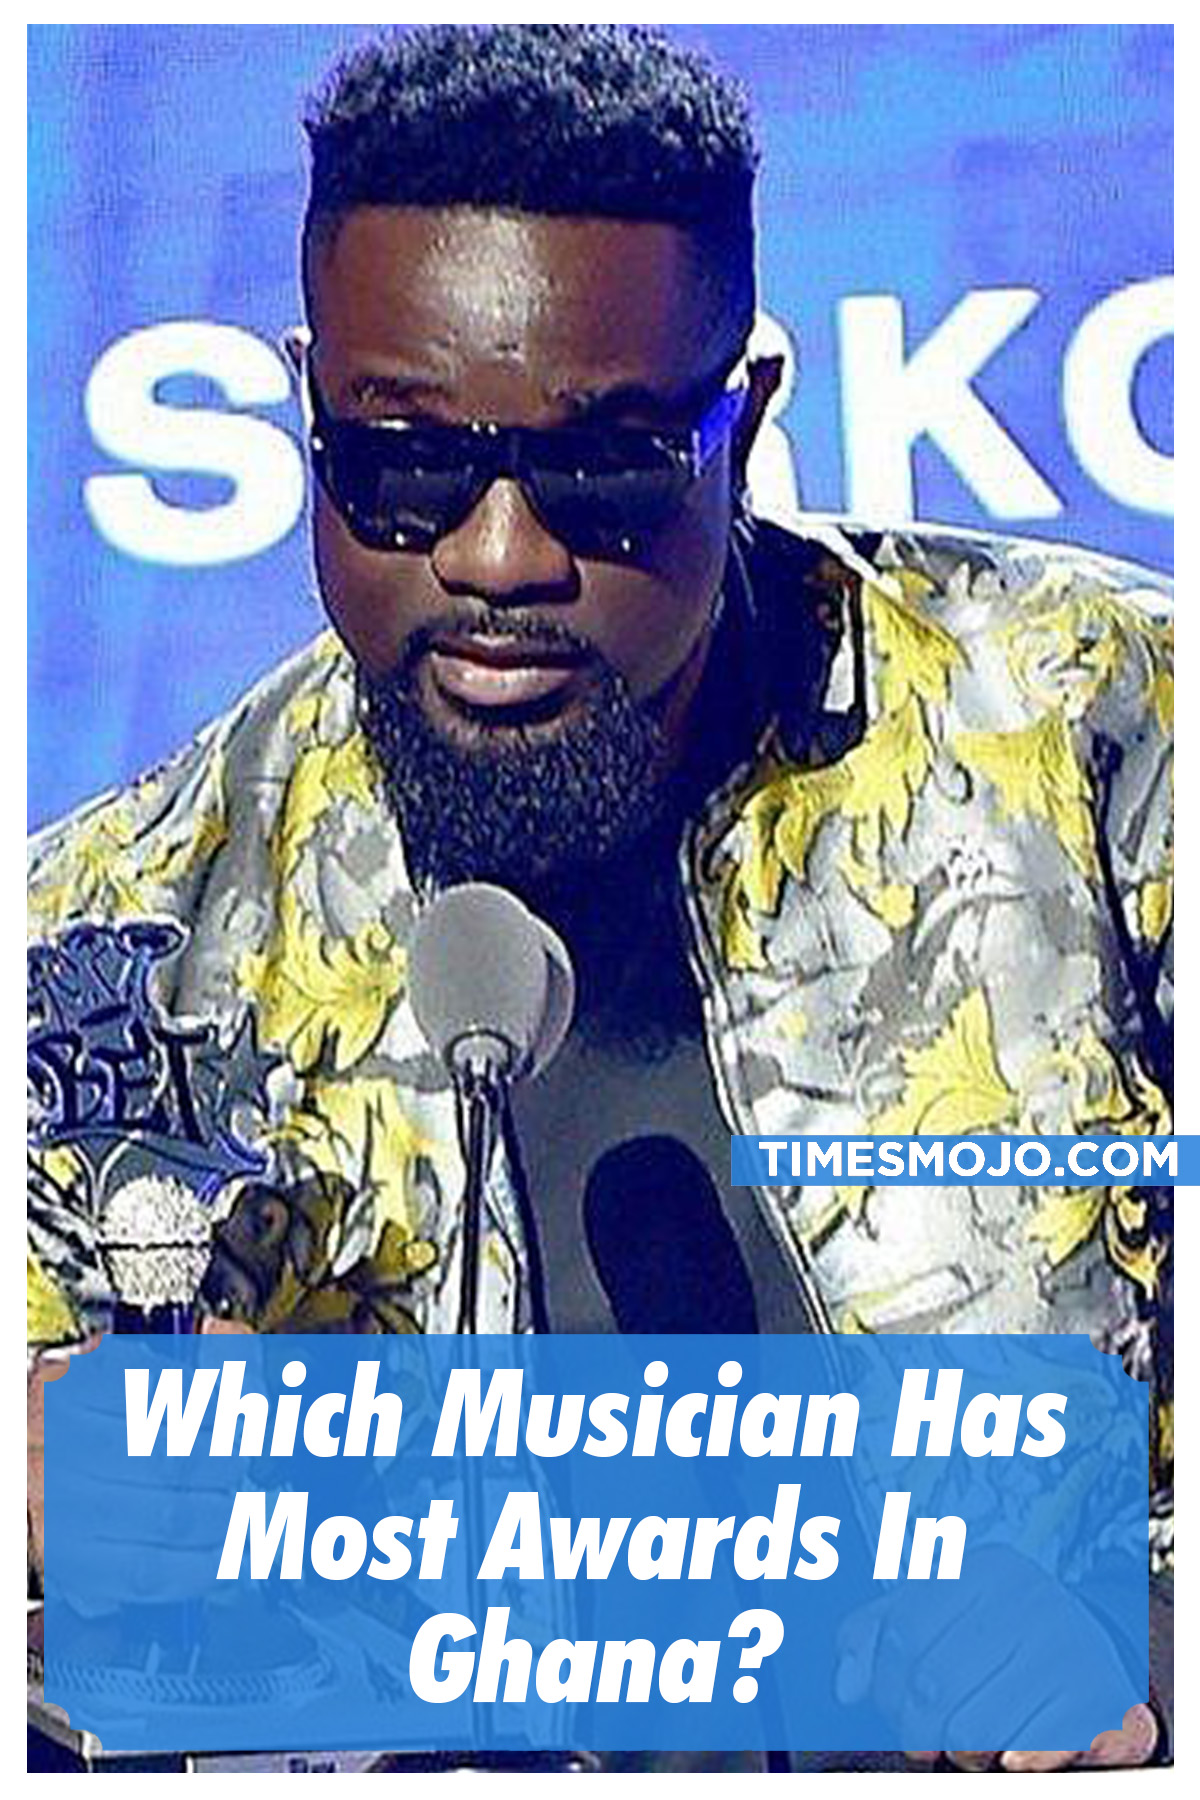 Which musician has most awards in Ghana? TimesMojo